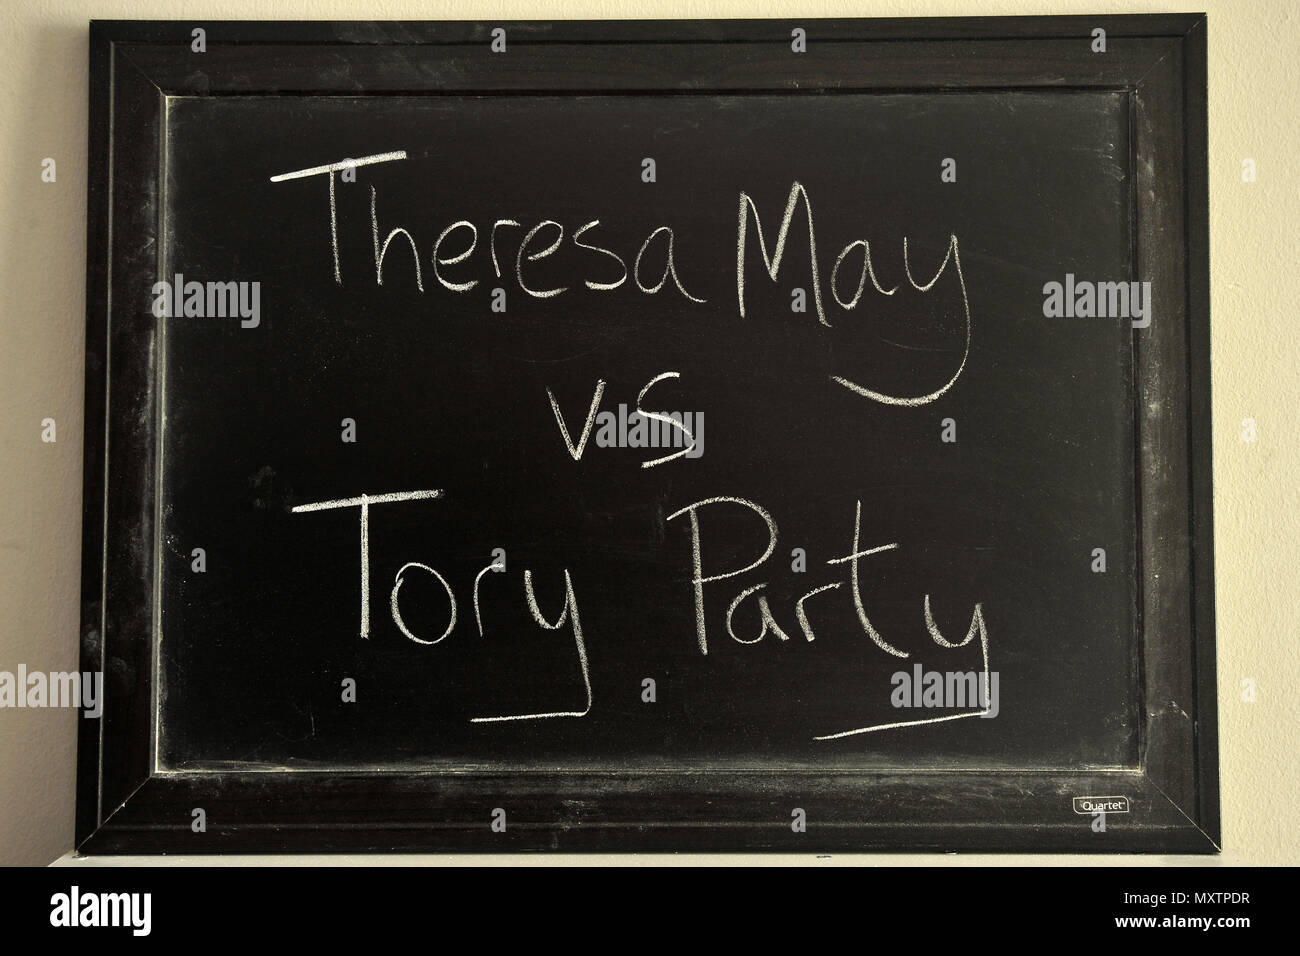 Theresa May vs Tory Party written in white chalk on a blackboard. Stock Photo